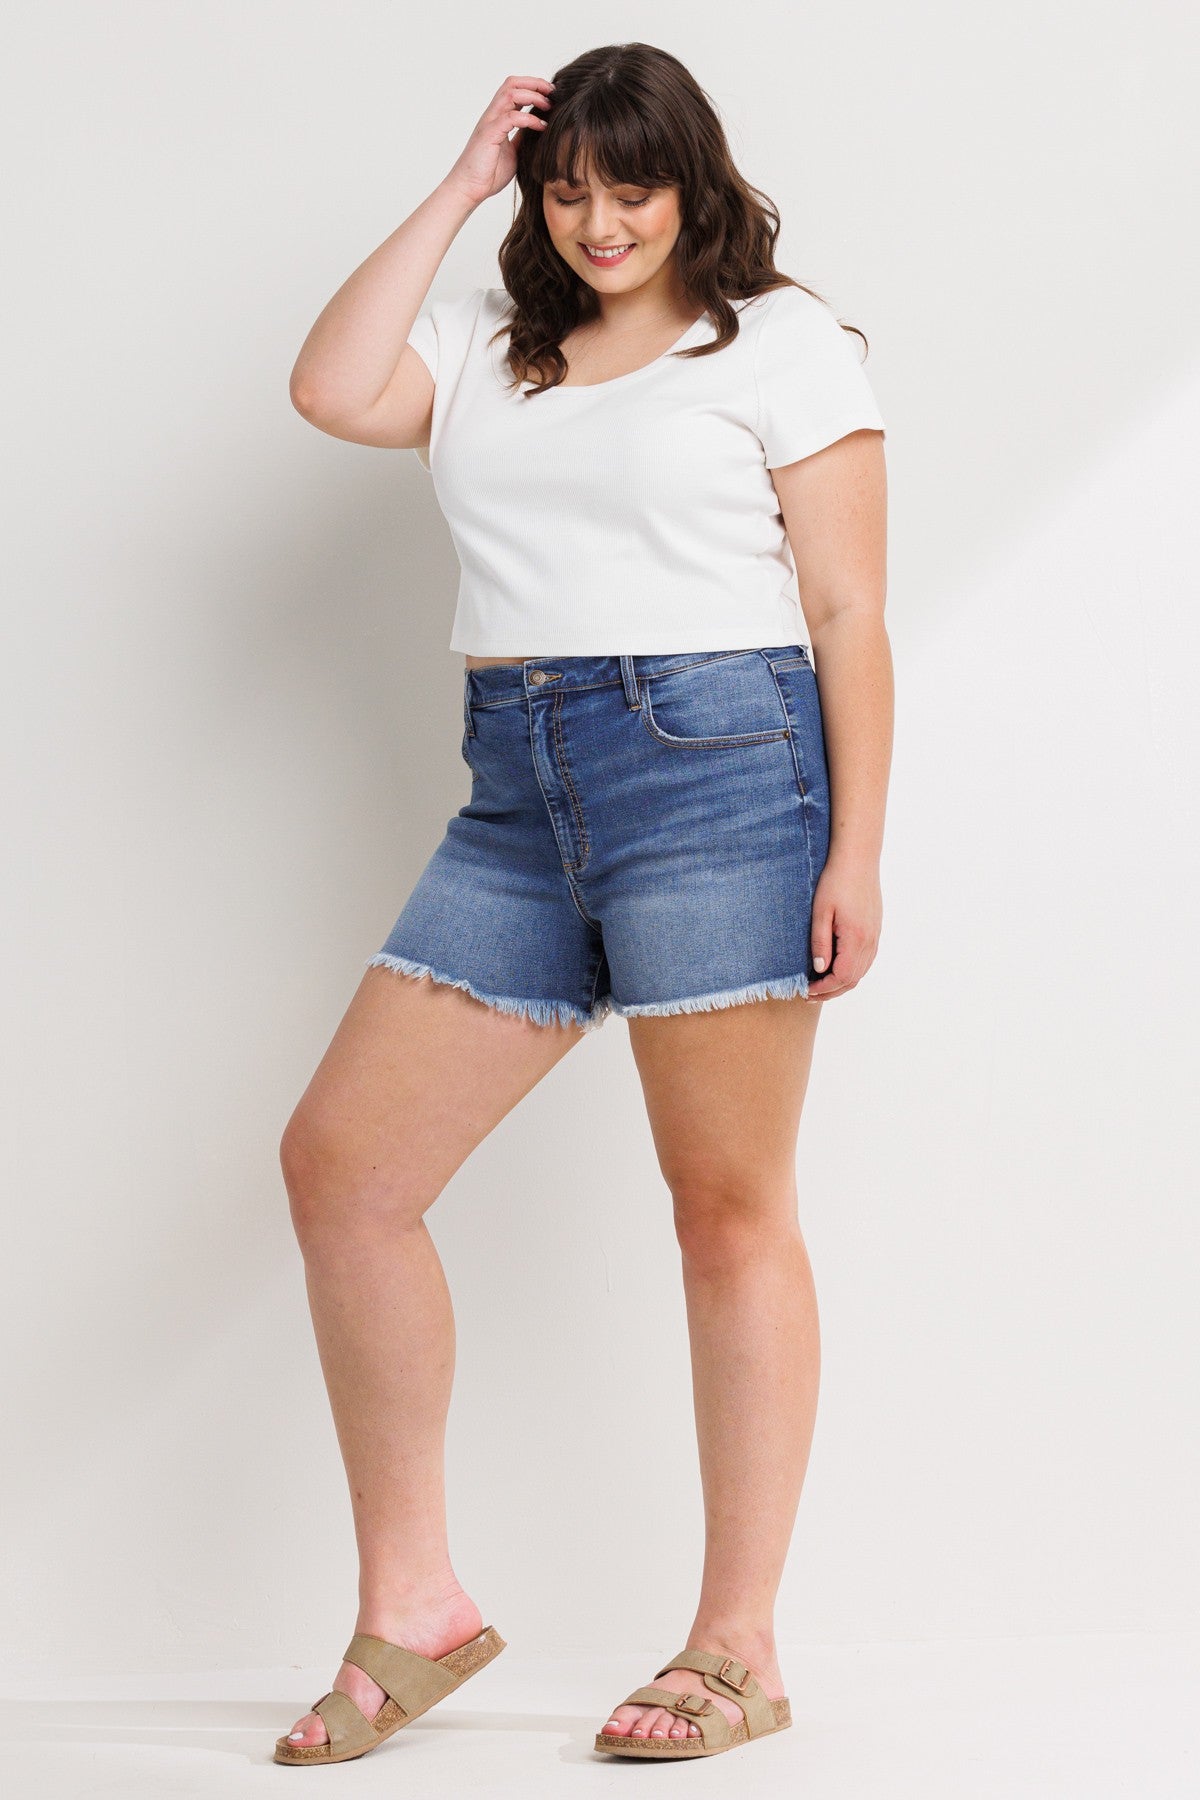 Imperialisme lotus Mars High Rise with Frayed Hem - plus size shorts – D. Lynne's Boutique